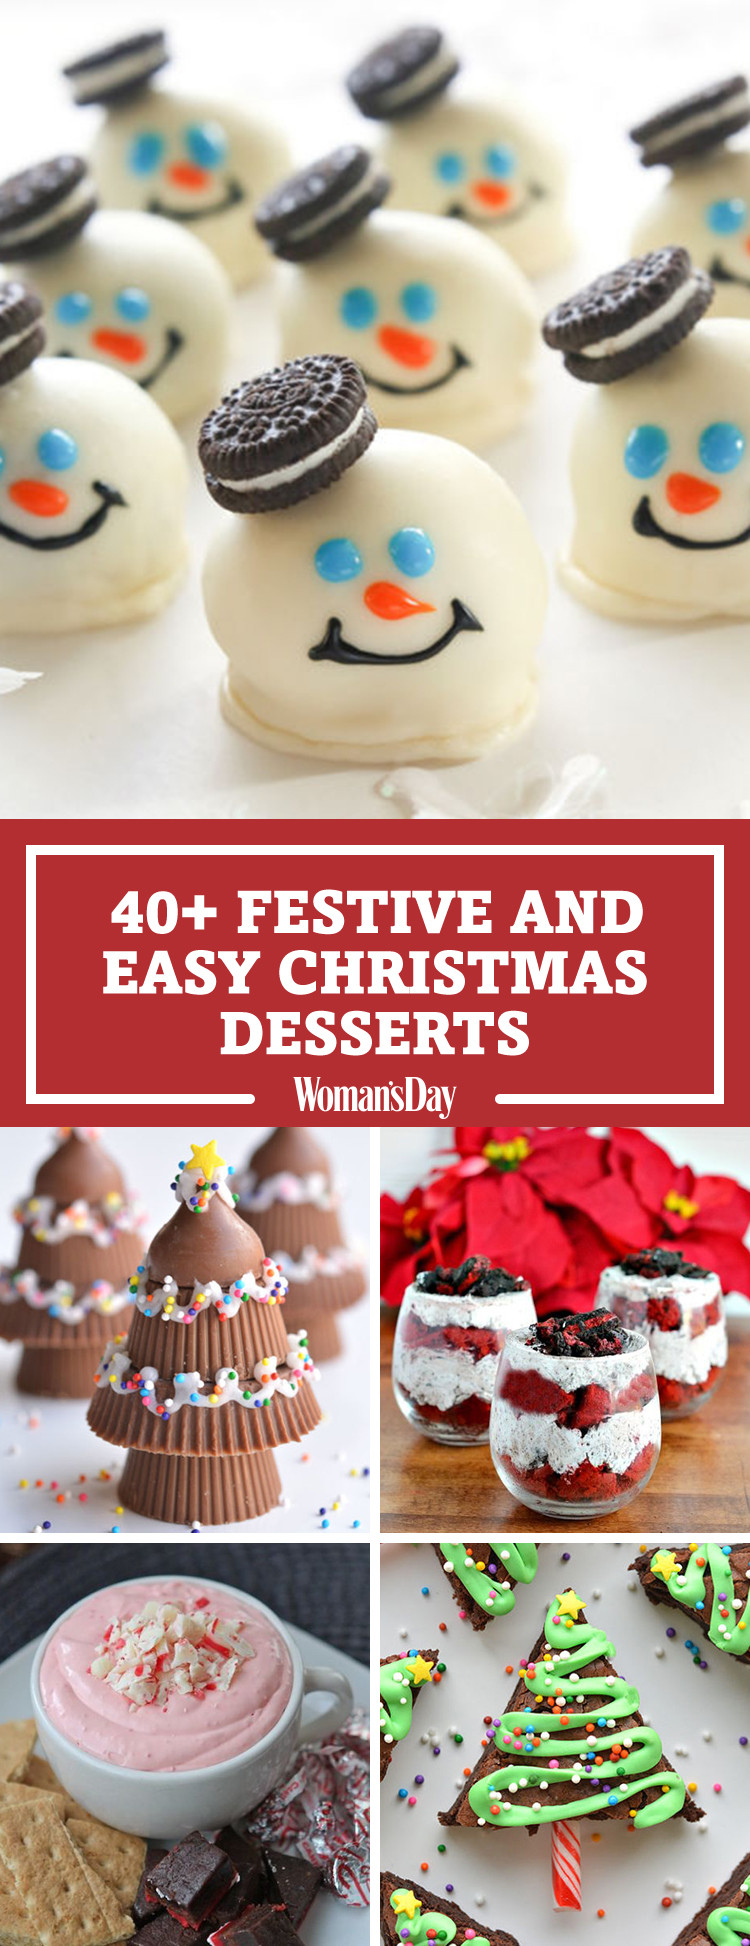 Holiday Desserts For Christmas
 57 Easy Christmas Dessert Recipes Best Ideas for Fun